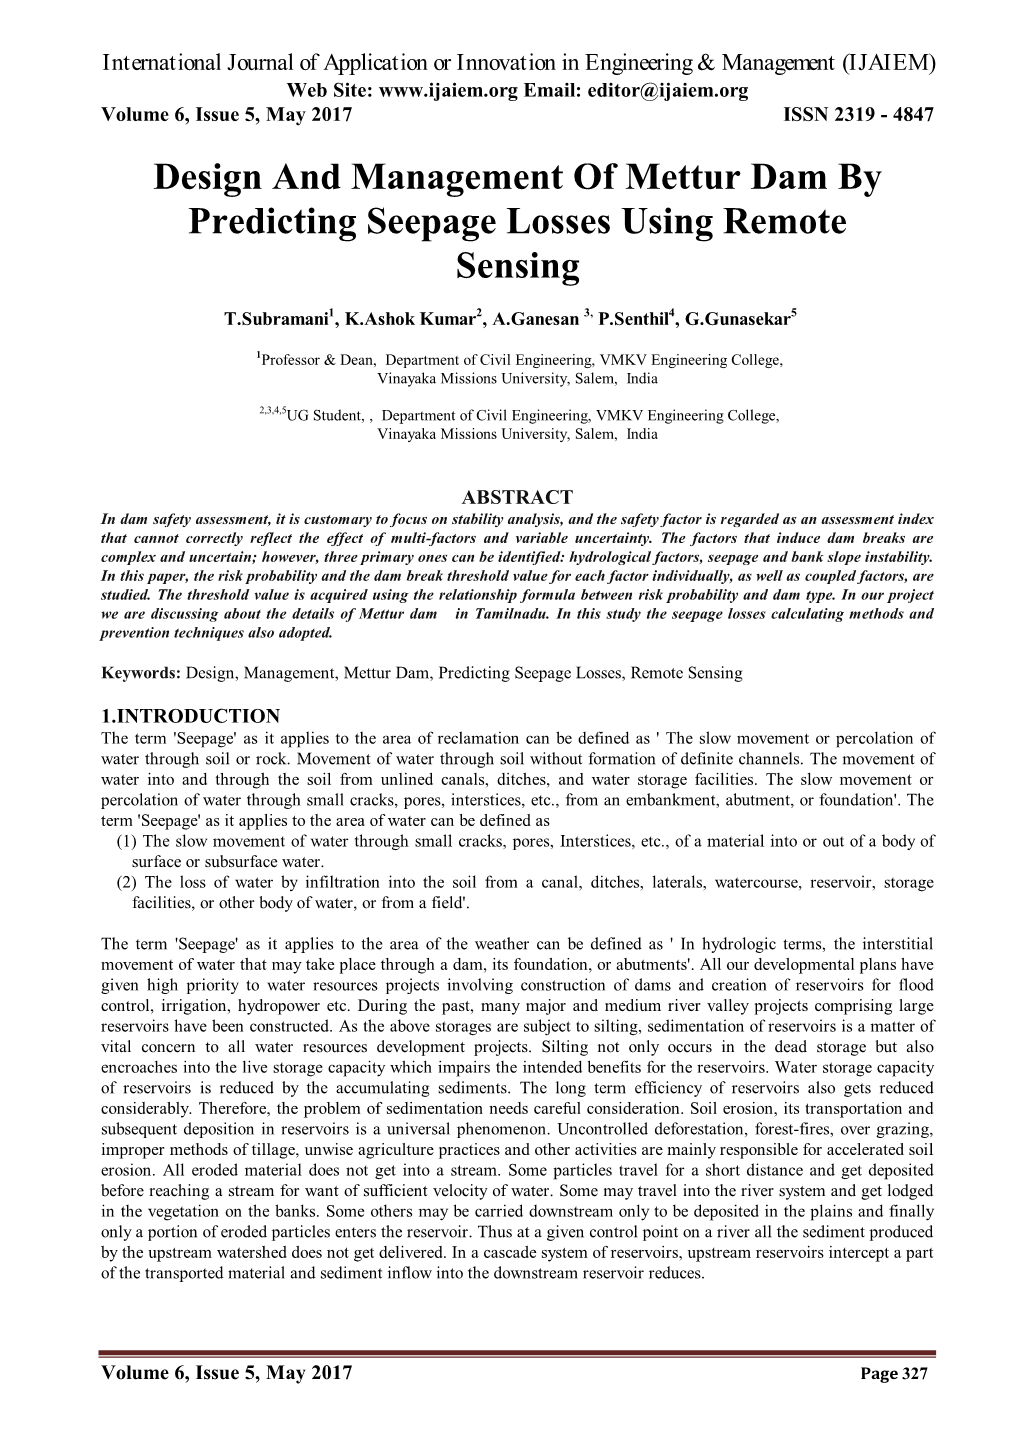 Design and Management of Mettur Dam by Predicting Seepage Losses Using Remote Sensing